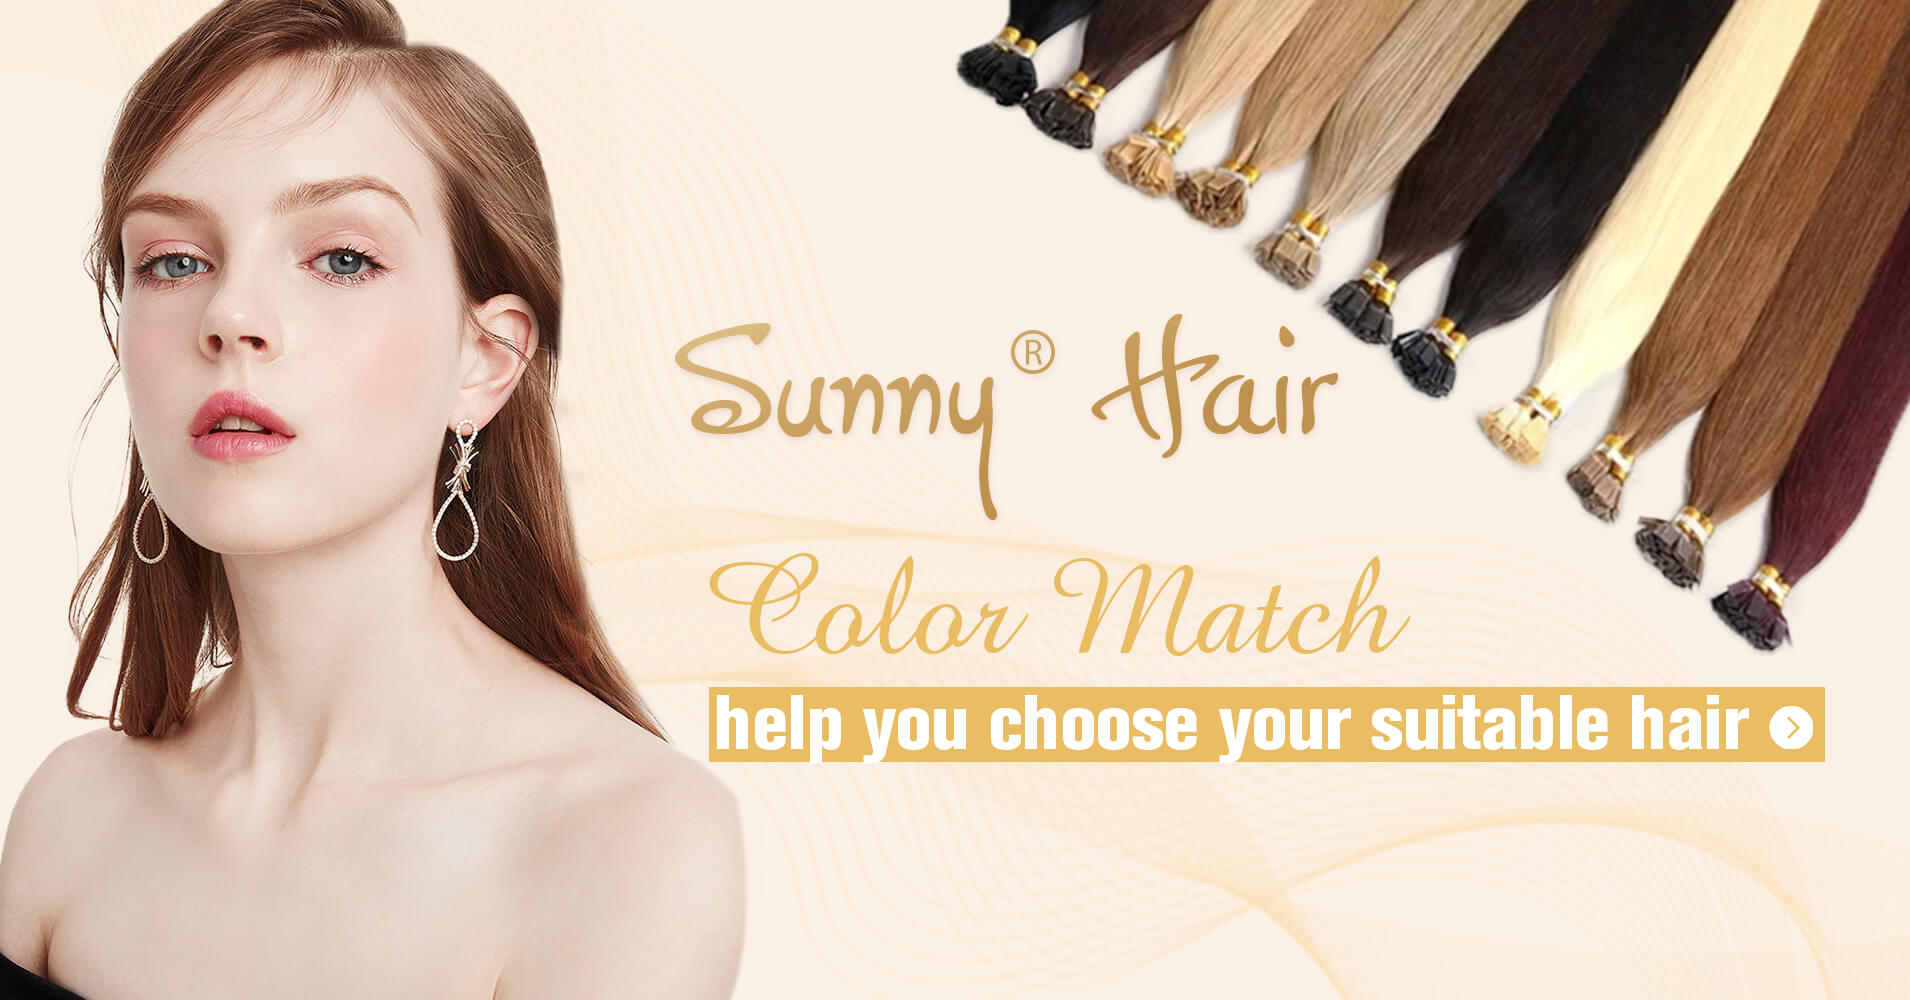 beaded weft hair extensions on short hair,beaded weft extensions for thin hair,natural hair extensions,micro beads hair extensions,micro beads hair,hair extension micro beads Sunny hair provide customer color match